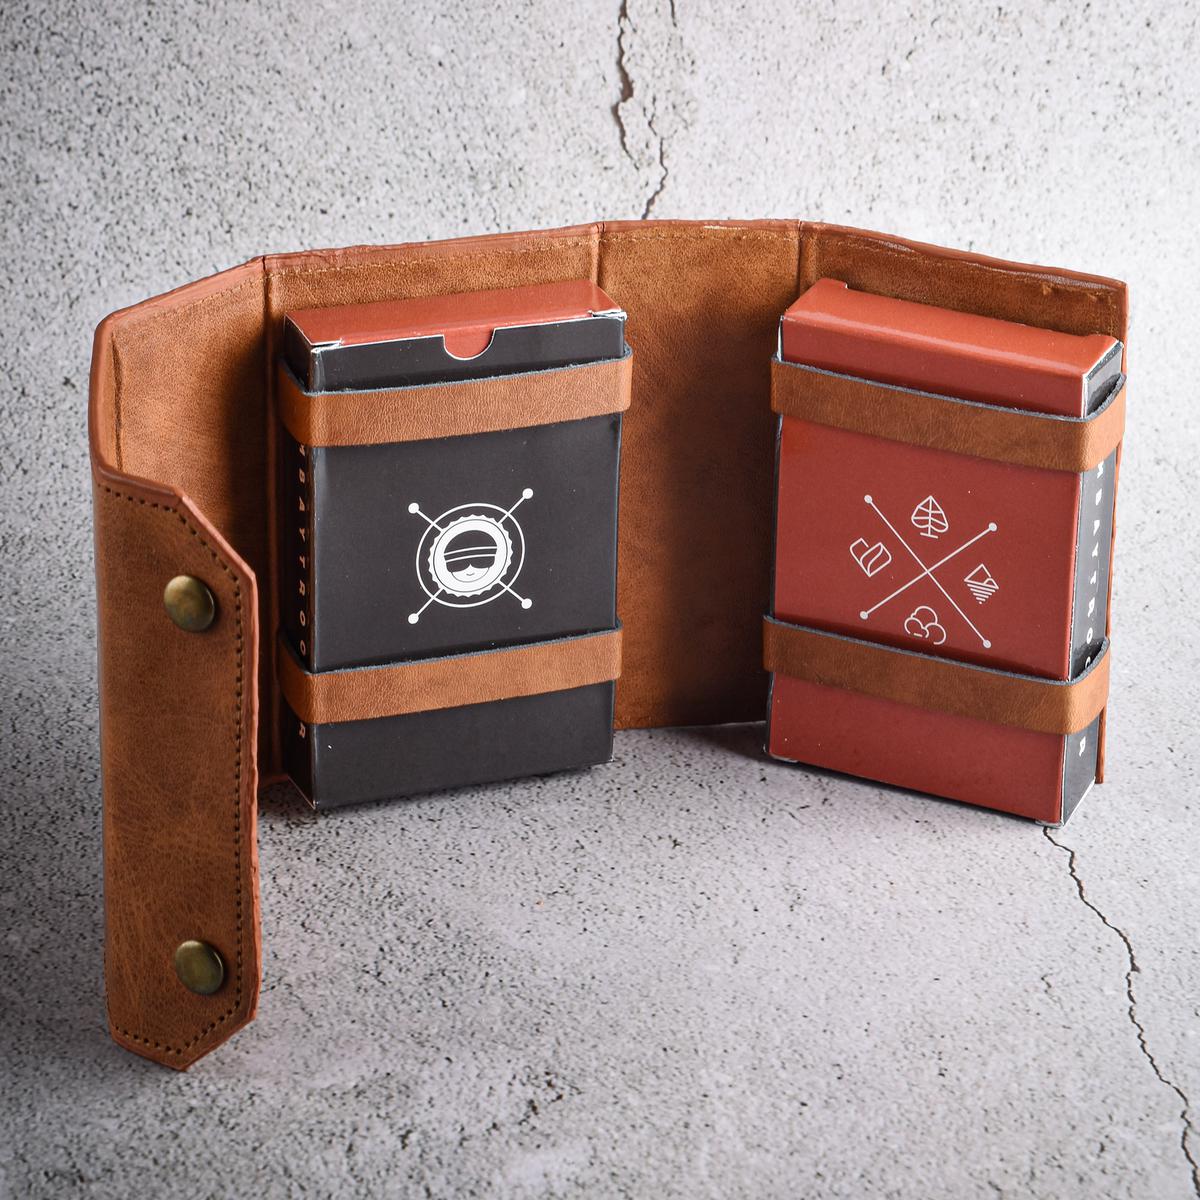  Bombay Trooper’s cards come in a set of two with a travel case